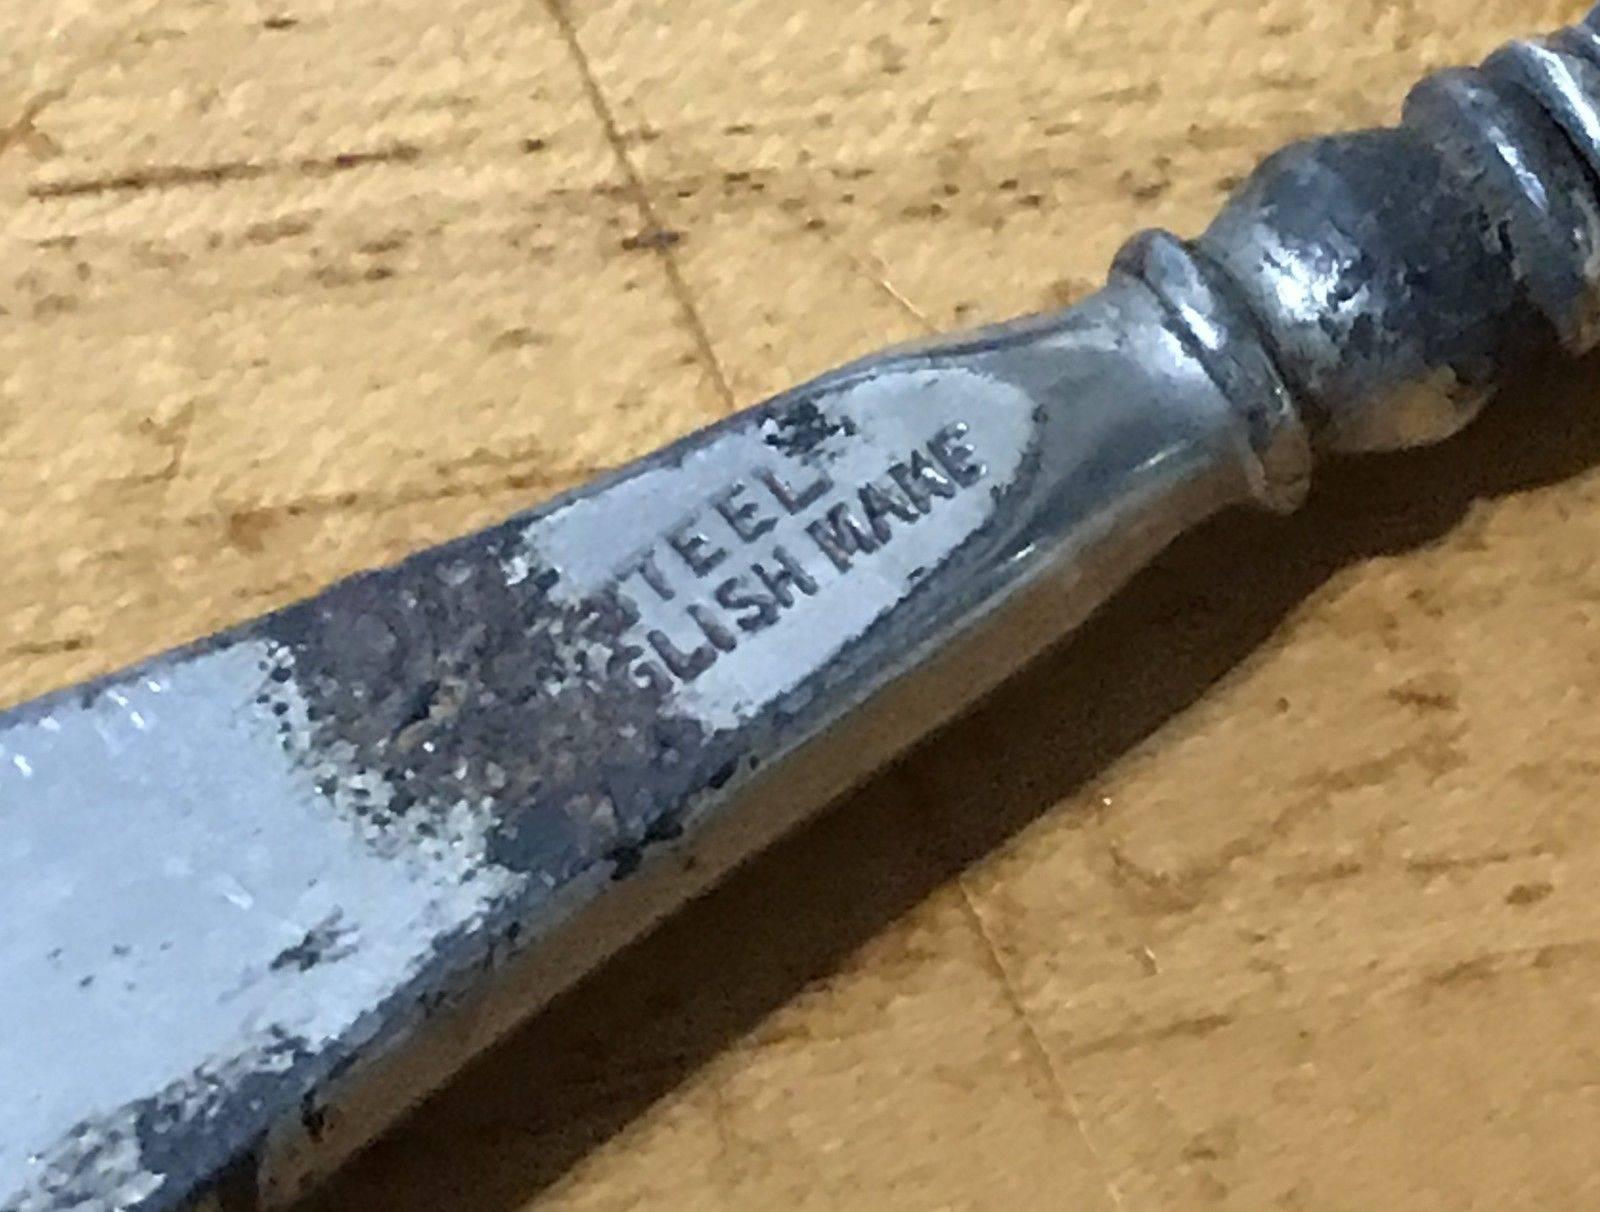 We are delighted to offer for sale for lovely 1919 sterling silver handled shoe horn

Fully hallmarked with the anchor for Birmingham, the letter U for 1919 and the lion for sterling, the makers mark is W&H for Walker and Hall

The handle is in